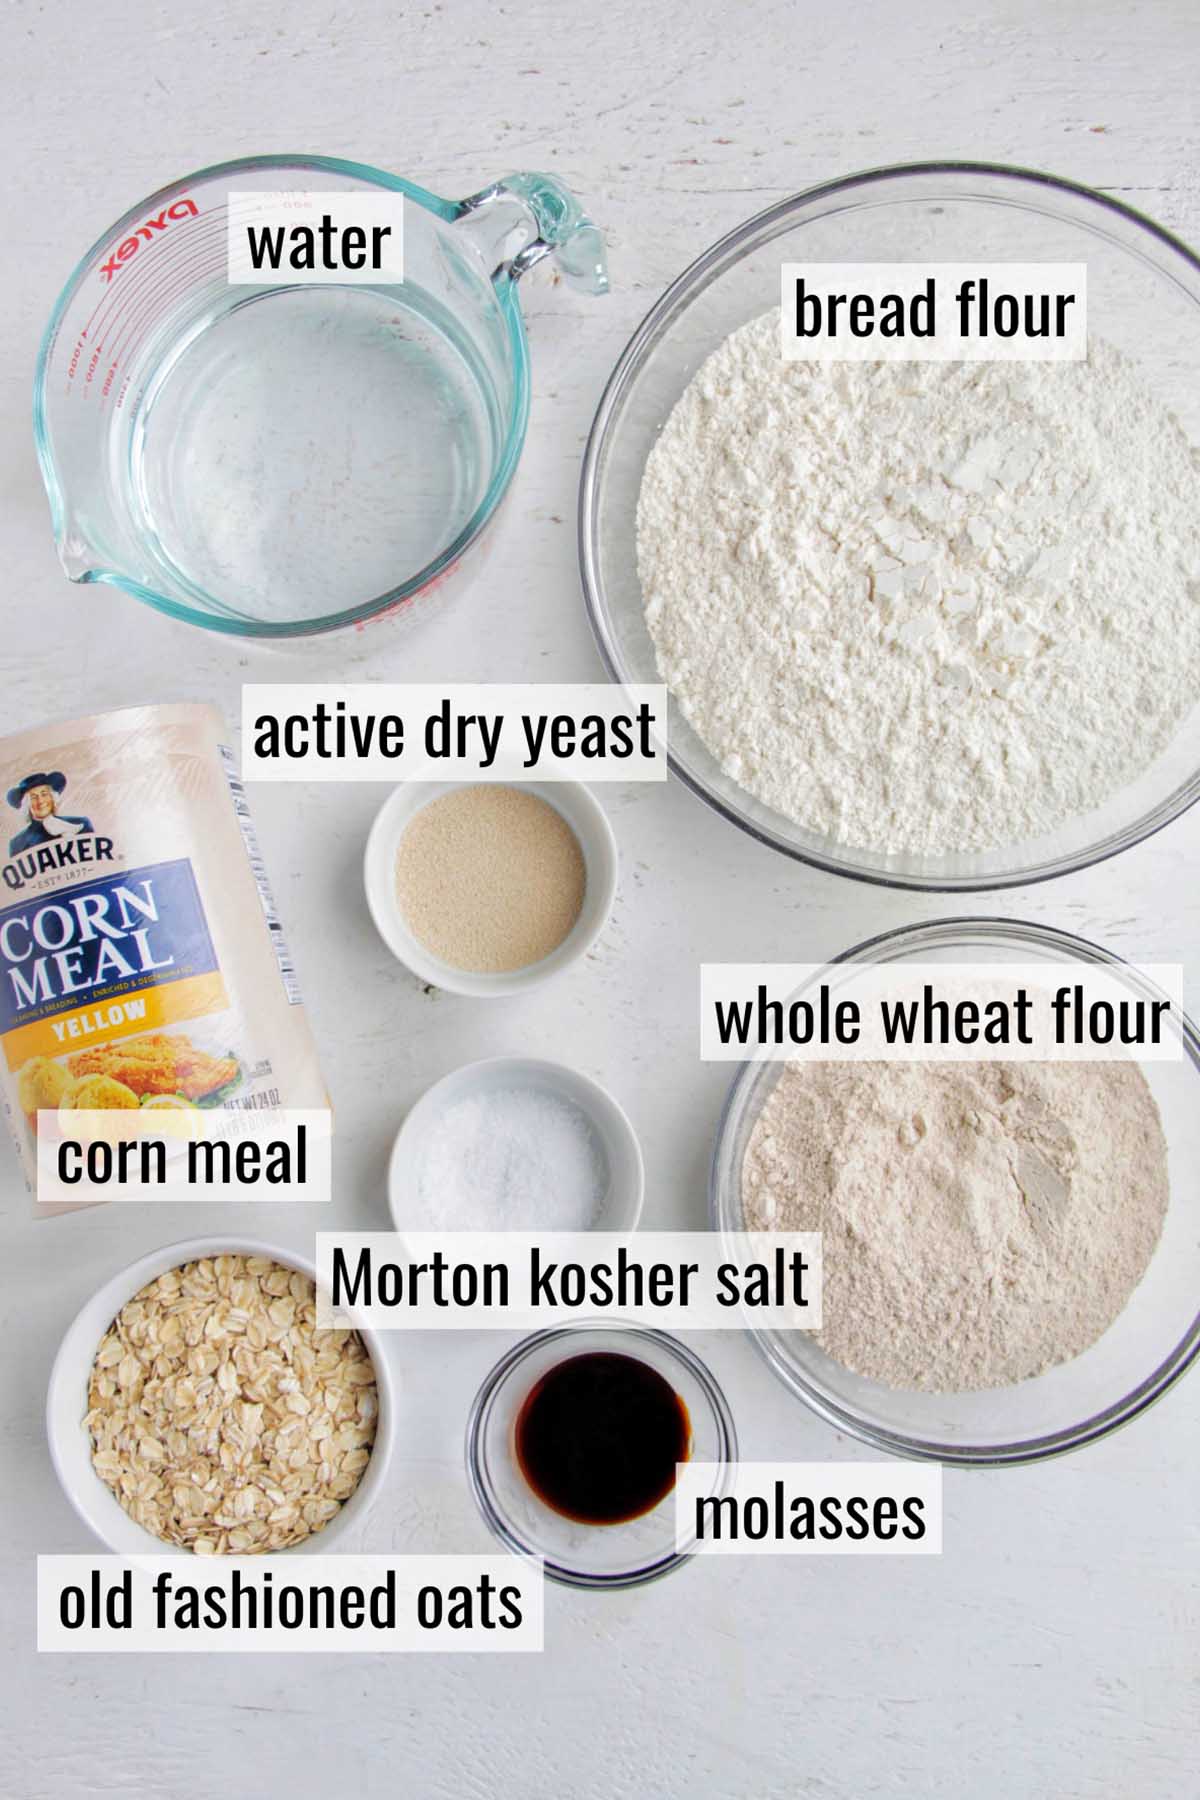 oatmeal bagel ingredients with labels.